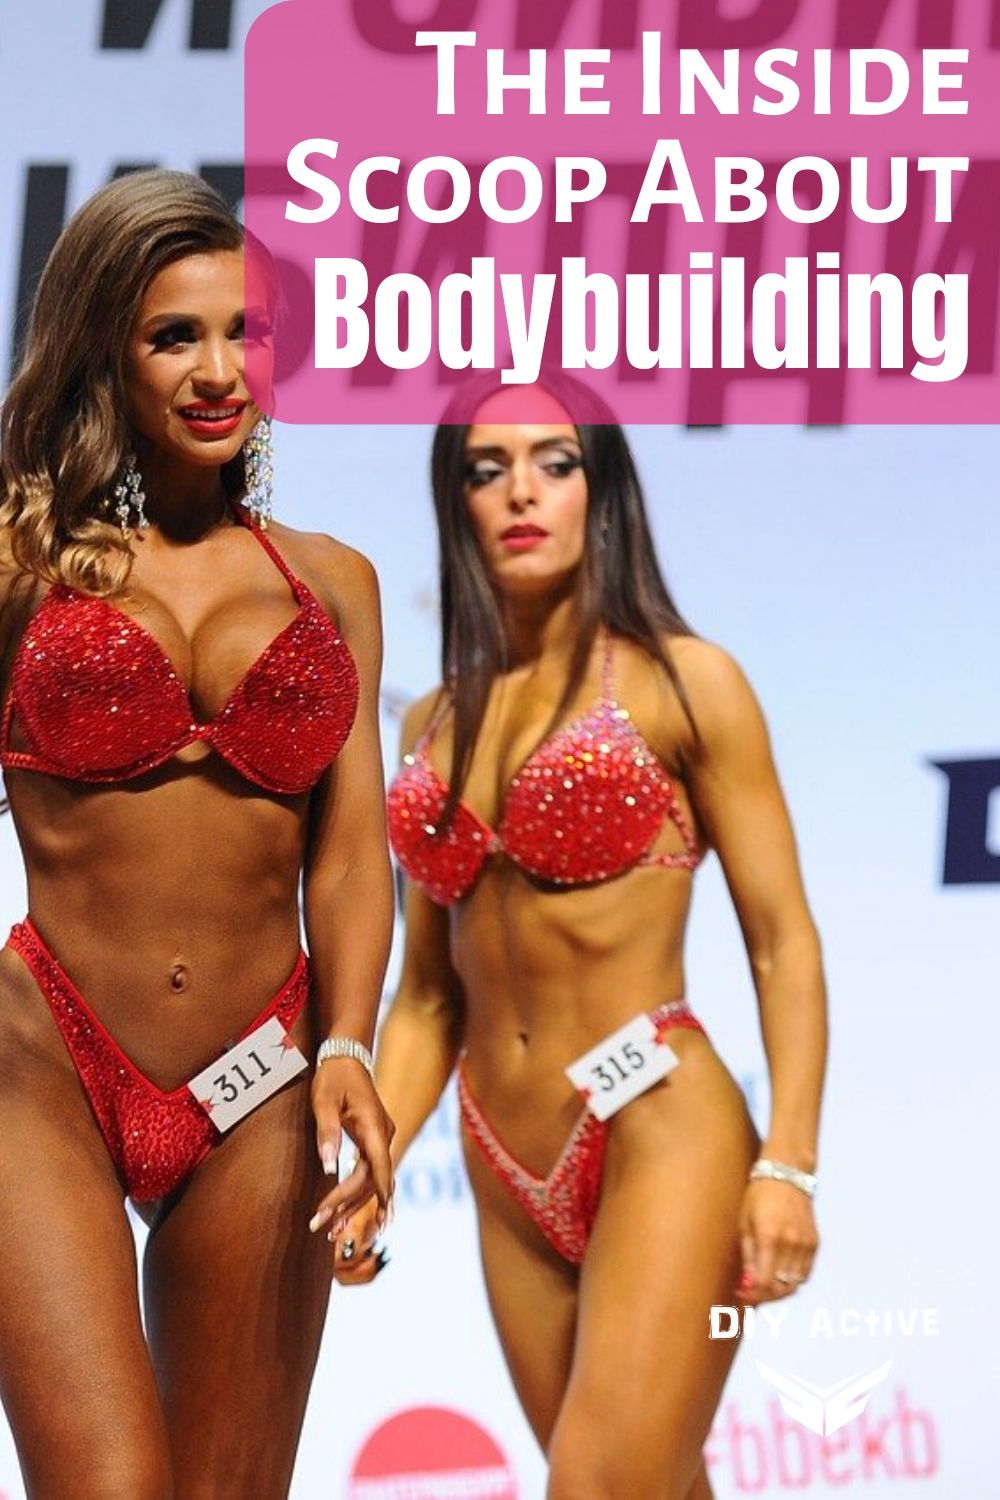 The Inside Scoop About Bodybuilding Get It Here